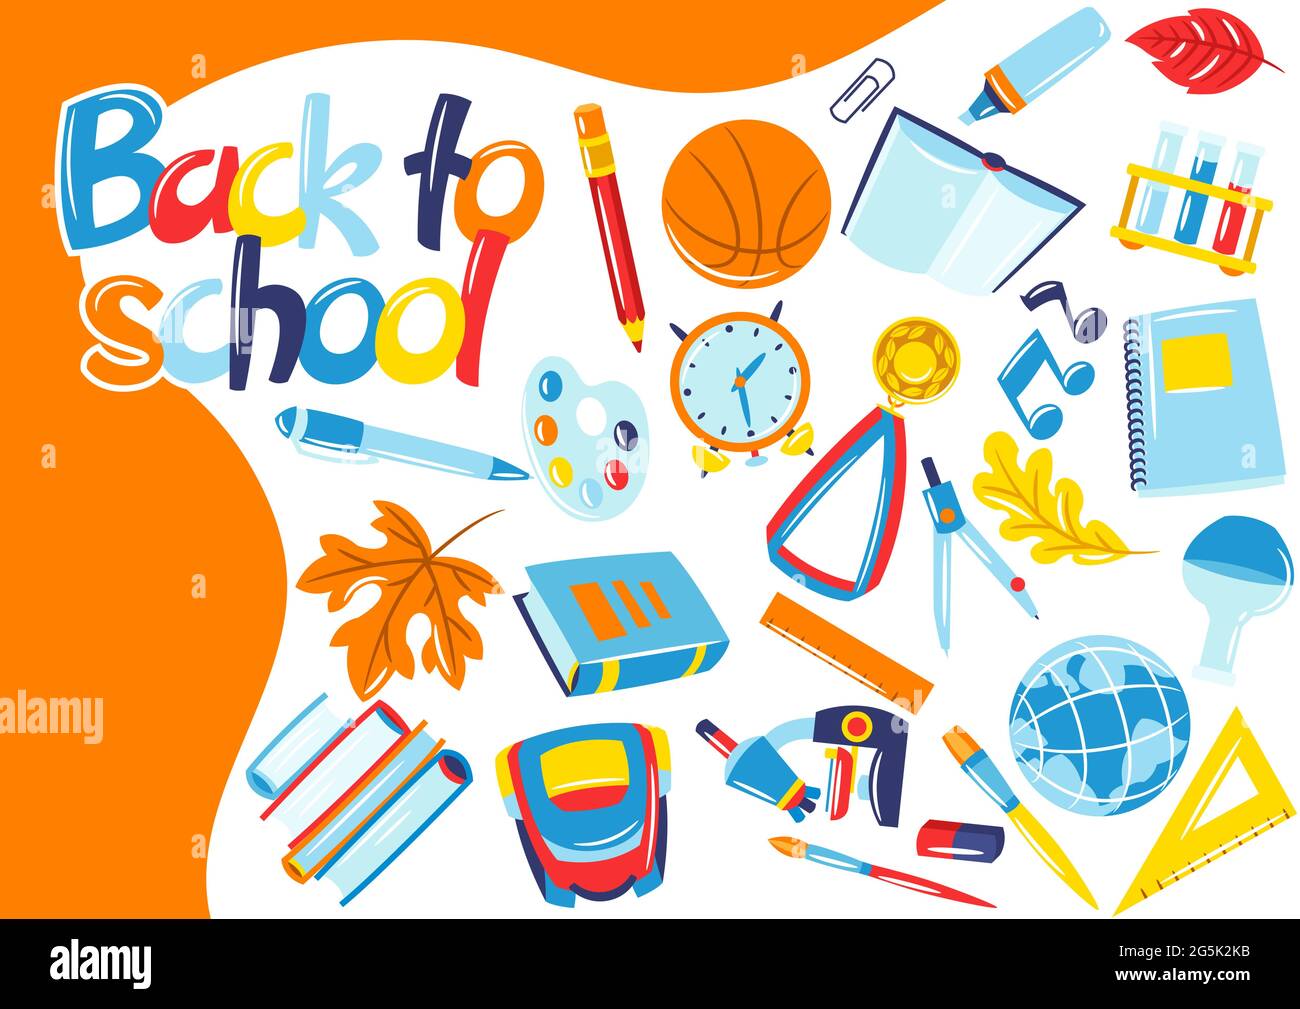 School background with education items. Illustration of supplies and stationery. Stock Vector